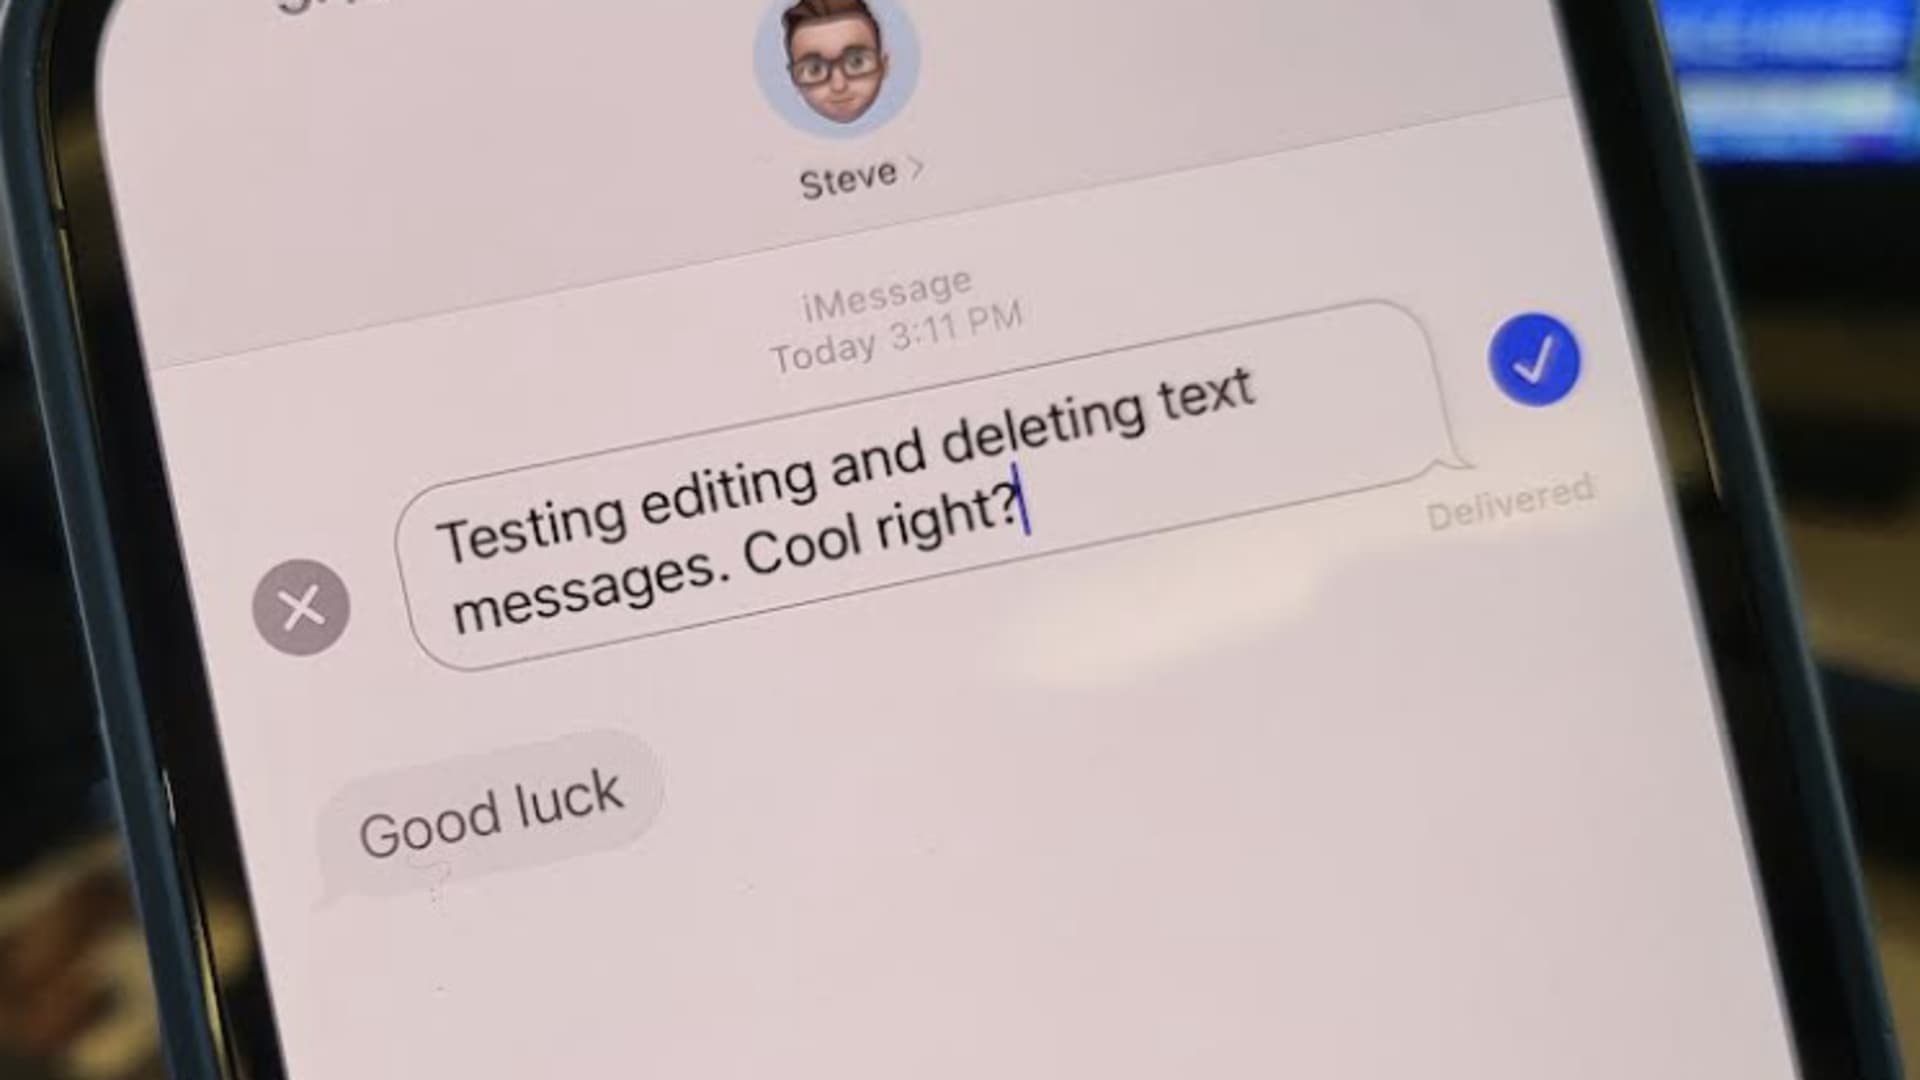 How to edit or unsend an iMessage on iPhone